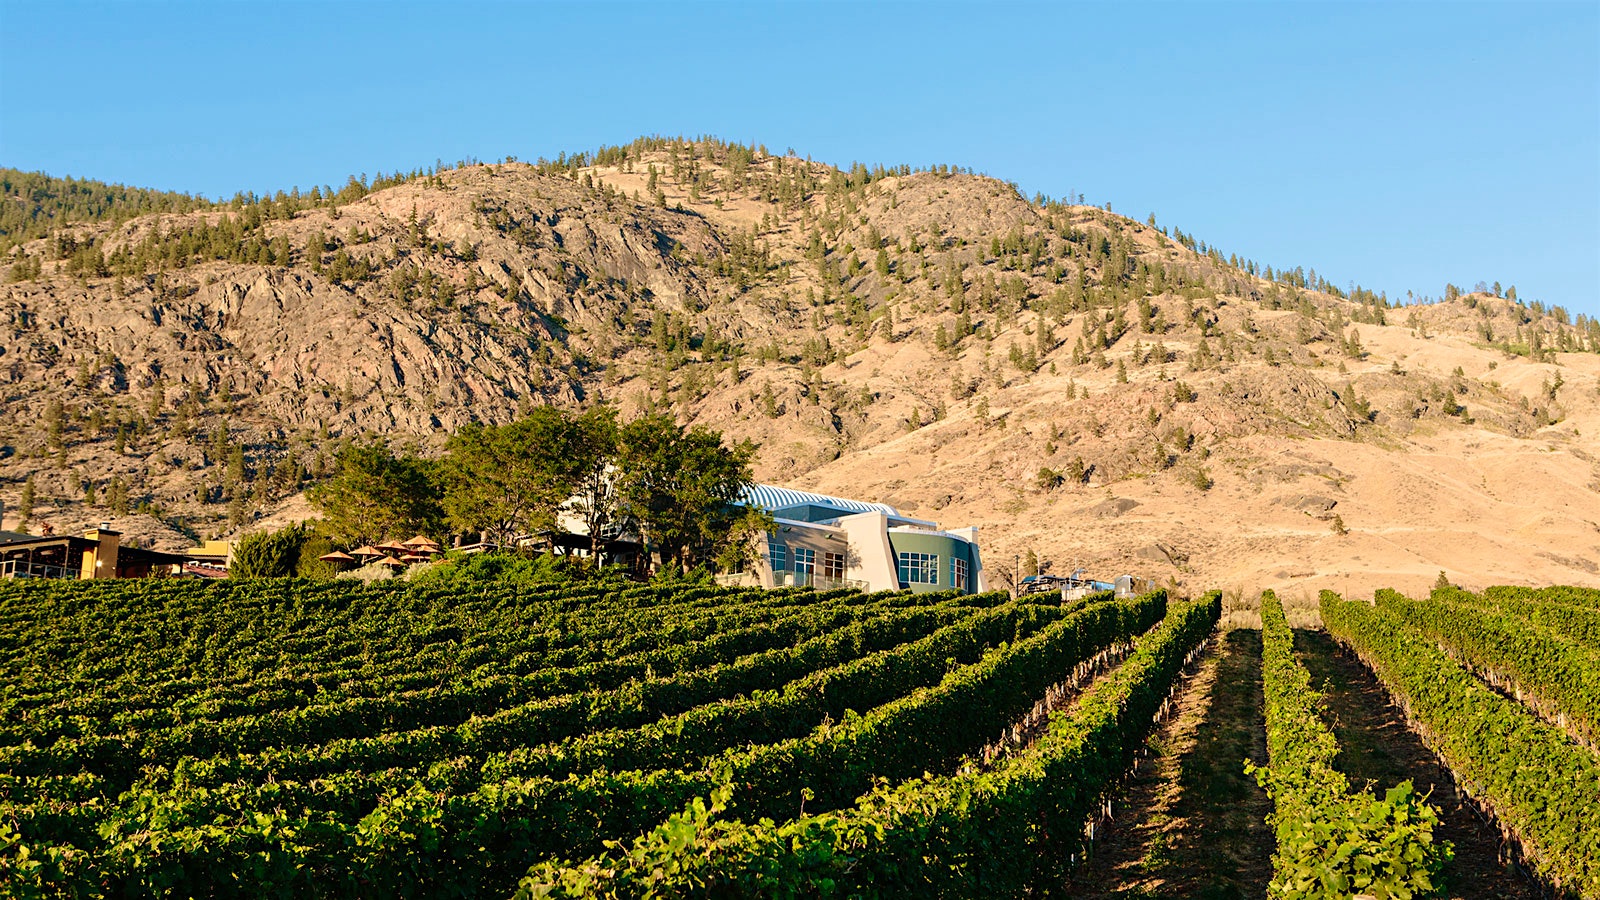  Vineyards surround Nk'Mip winery, with mountains in the background